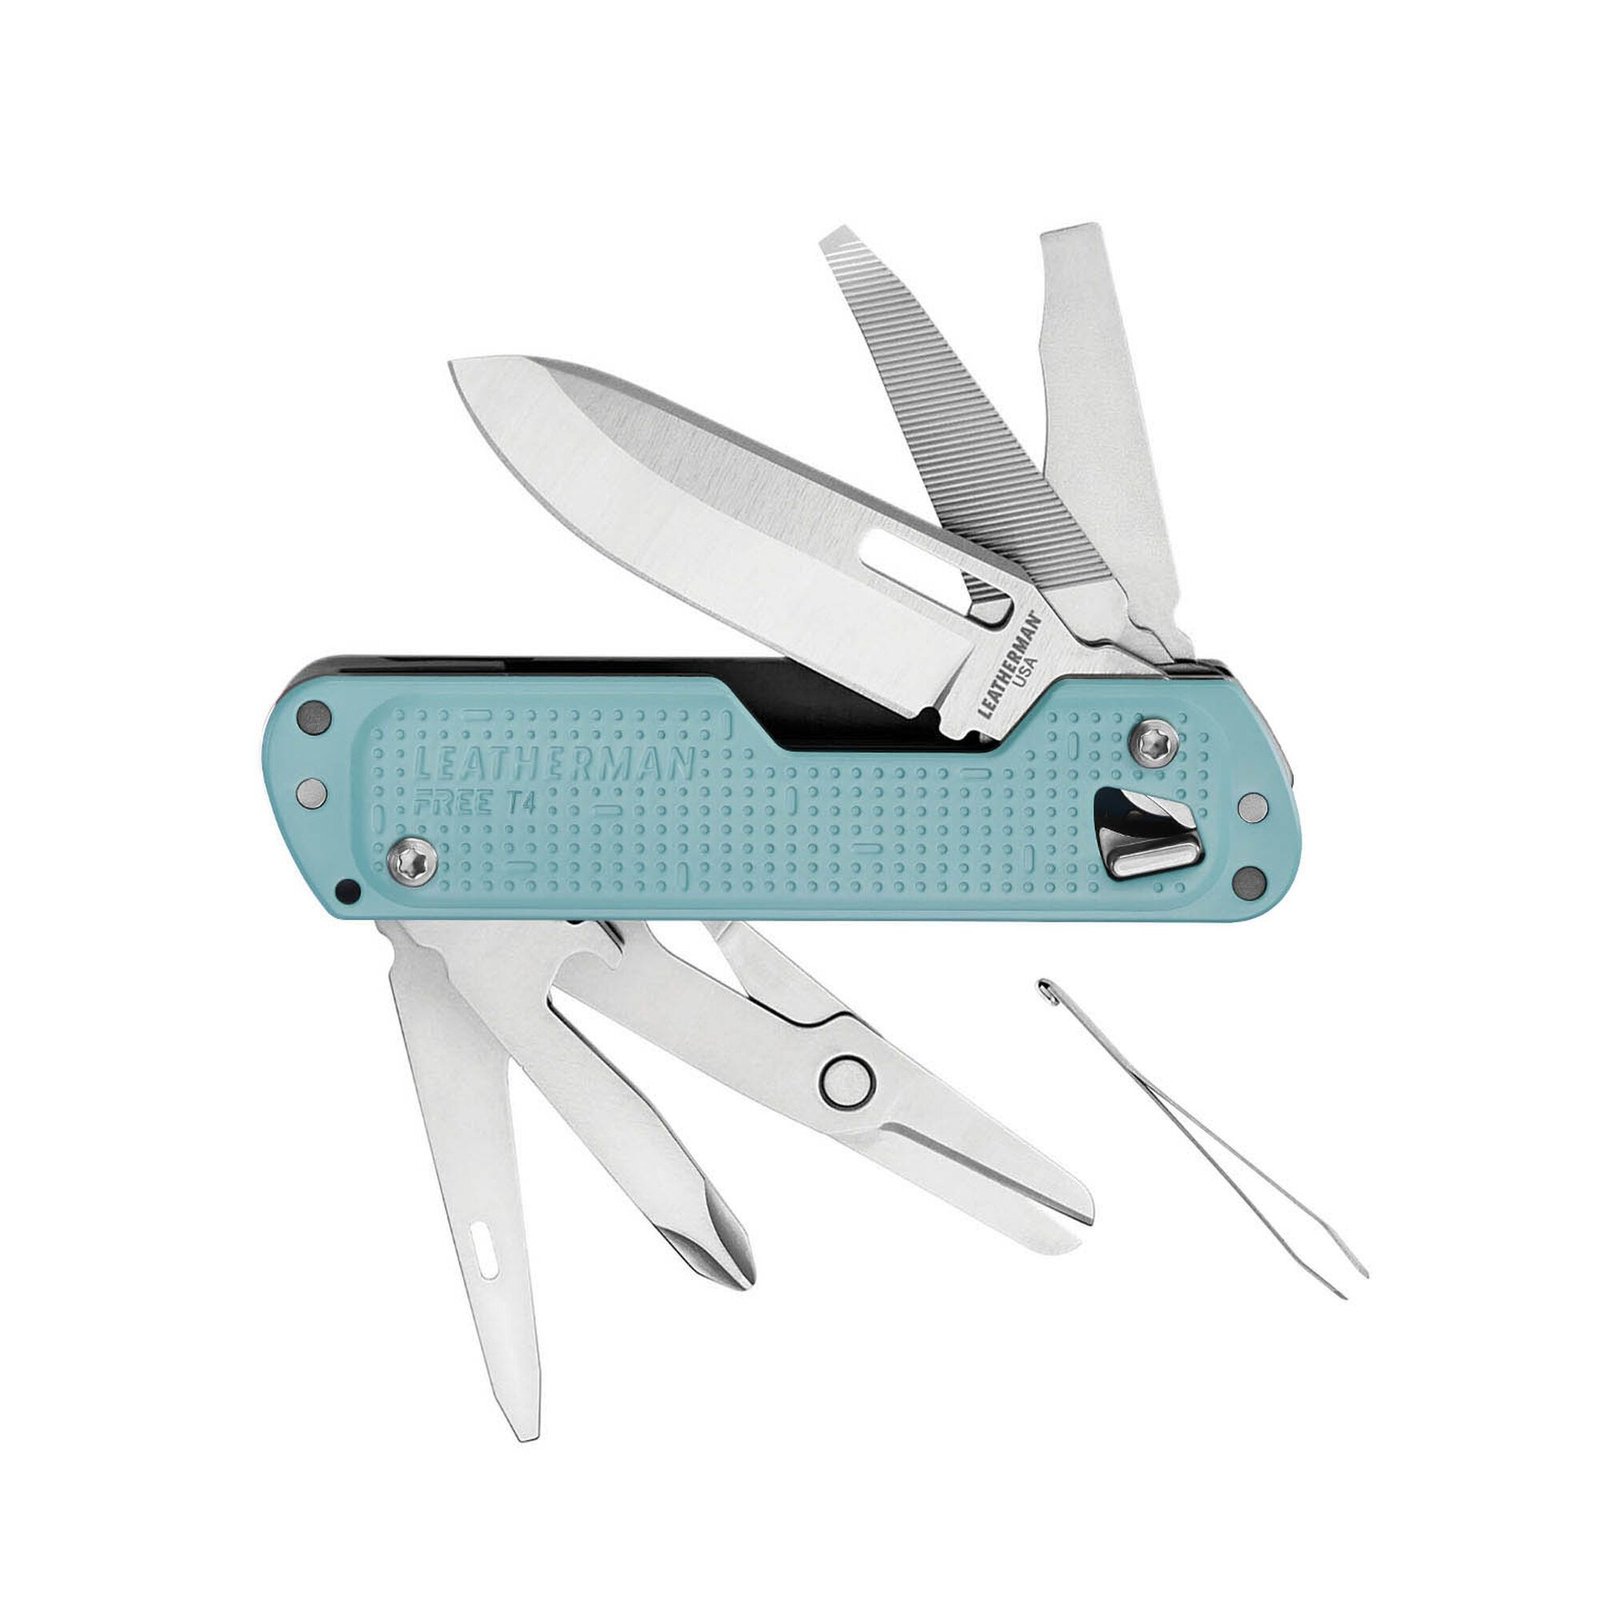 Leatherman Free T4 Camping And Survival Multi-Tool With 12 Built-In Tools | Best N Top